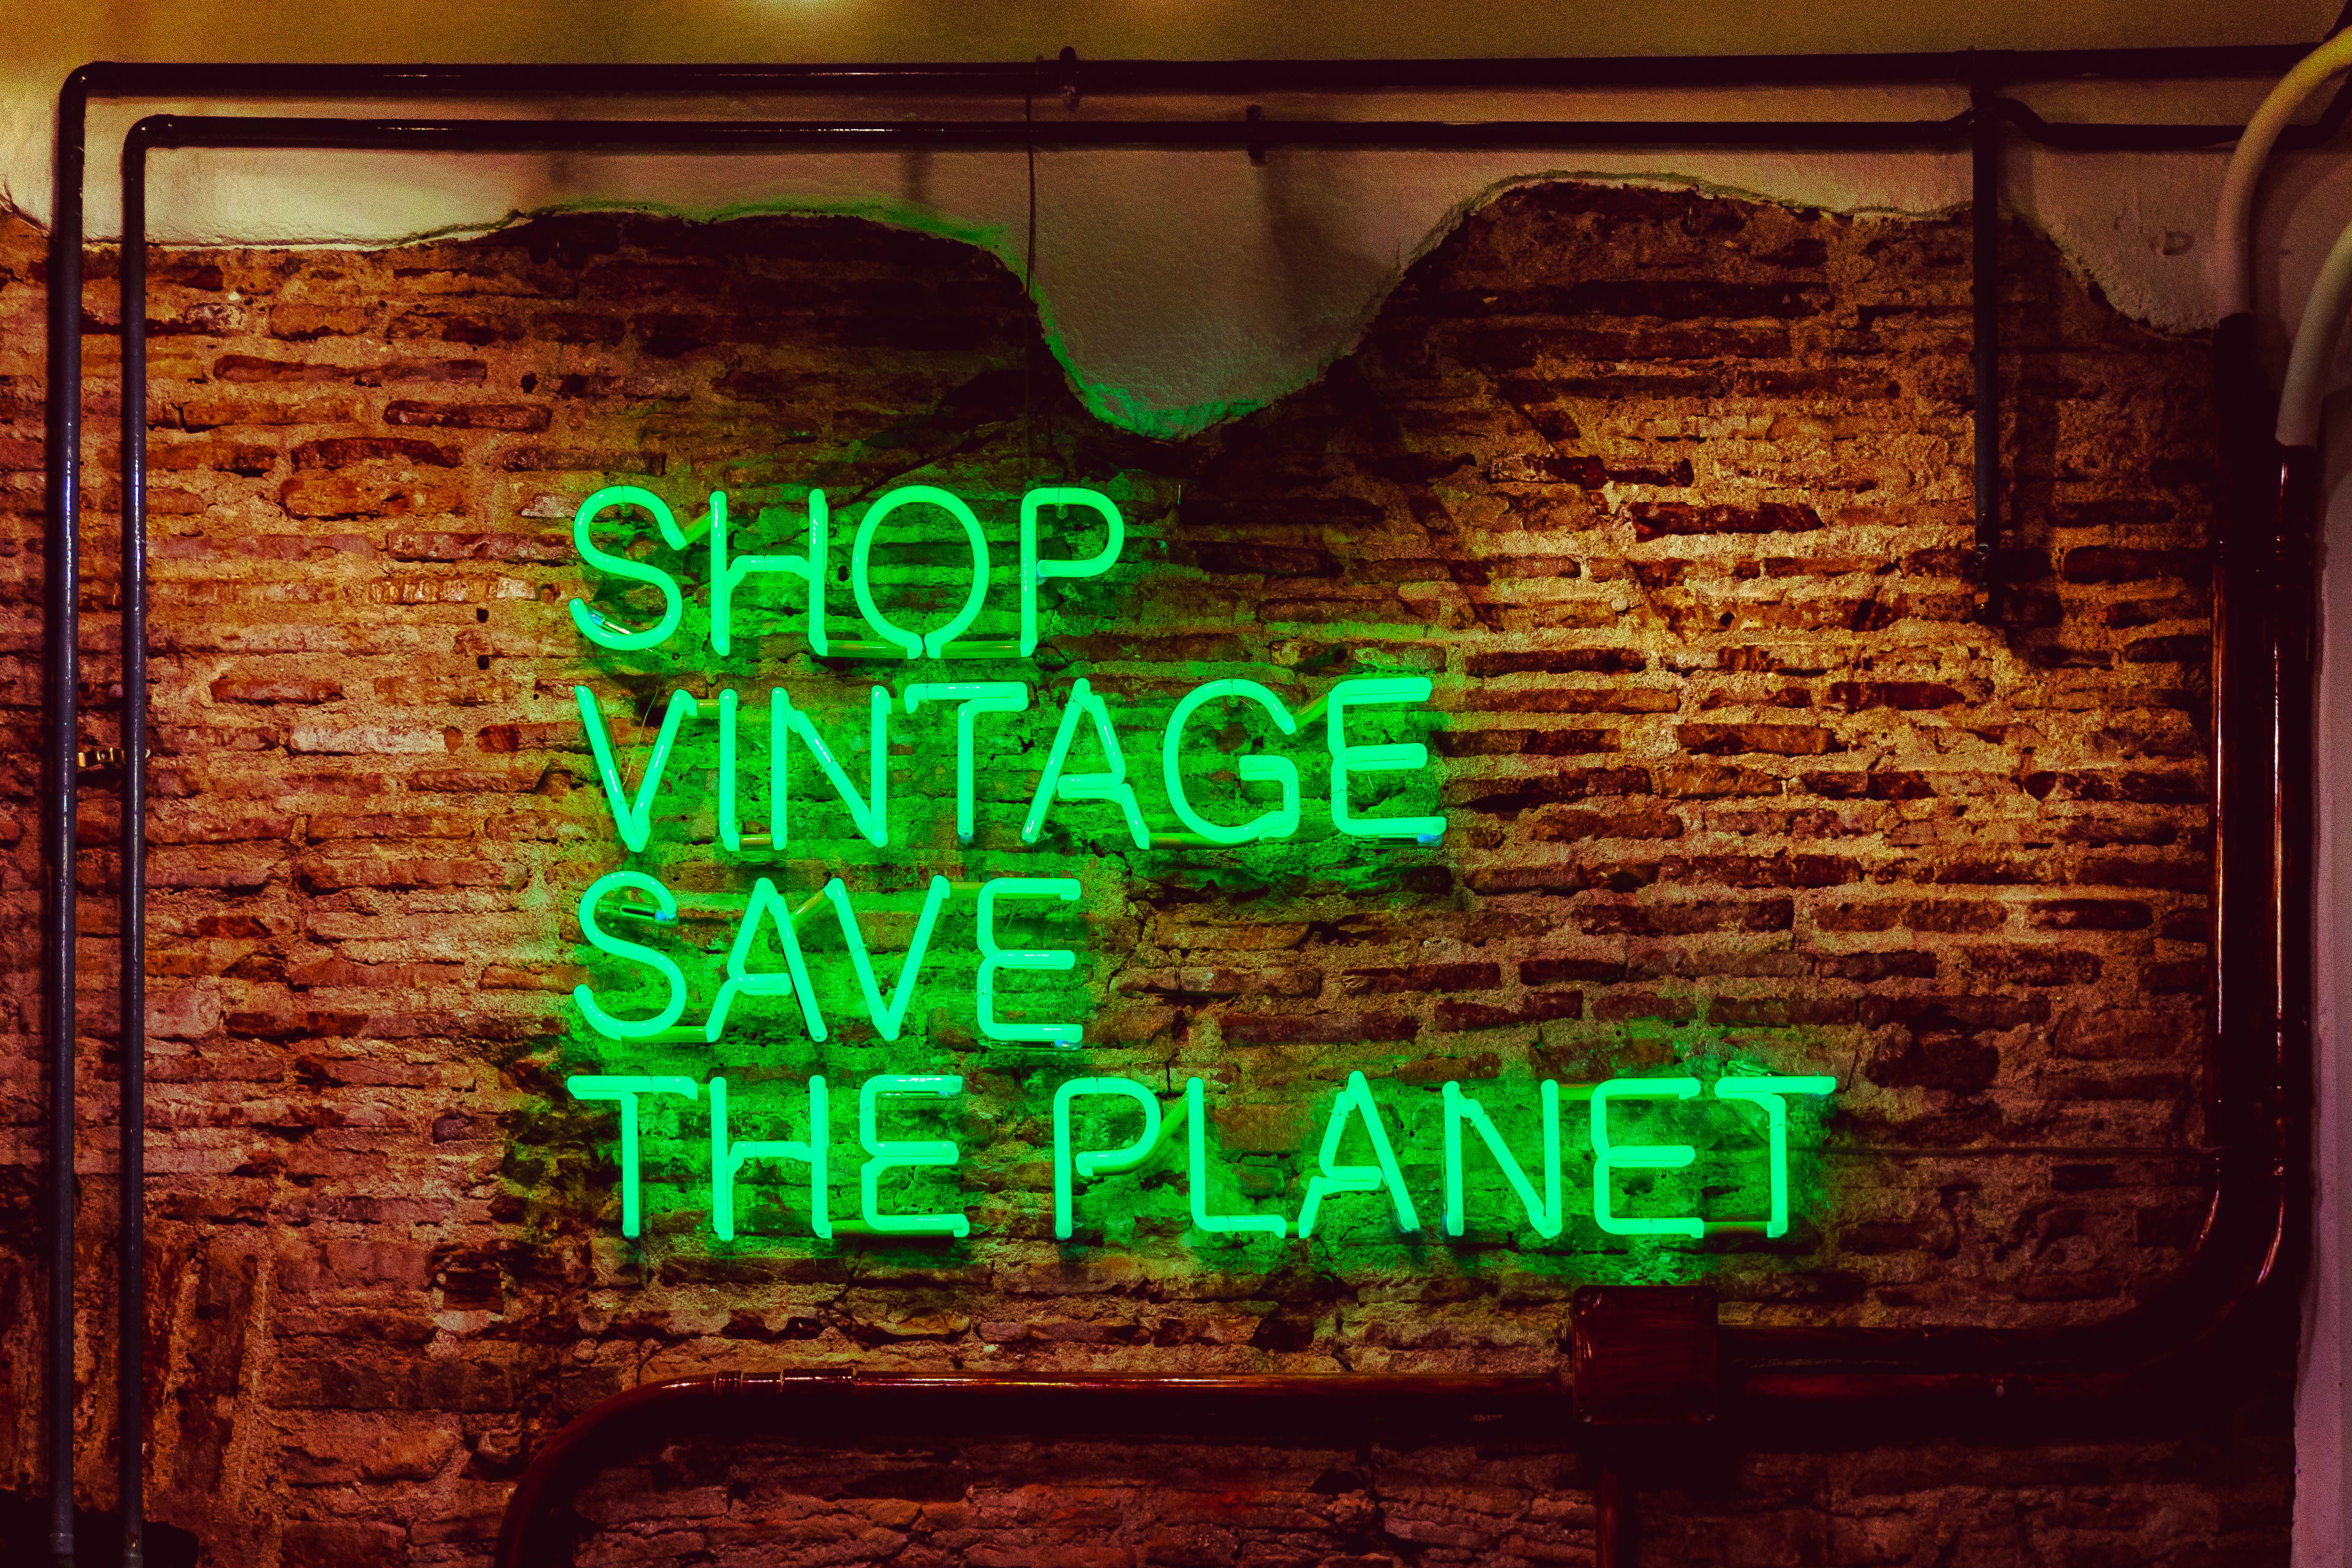 Green neon sign that says "Shop vintage save the planet"